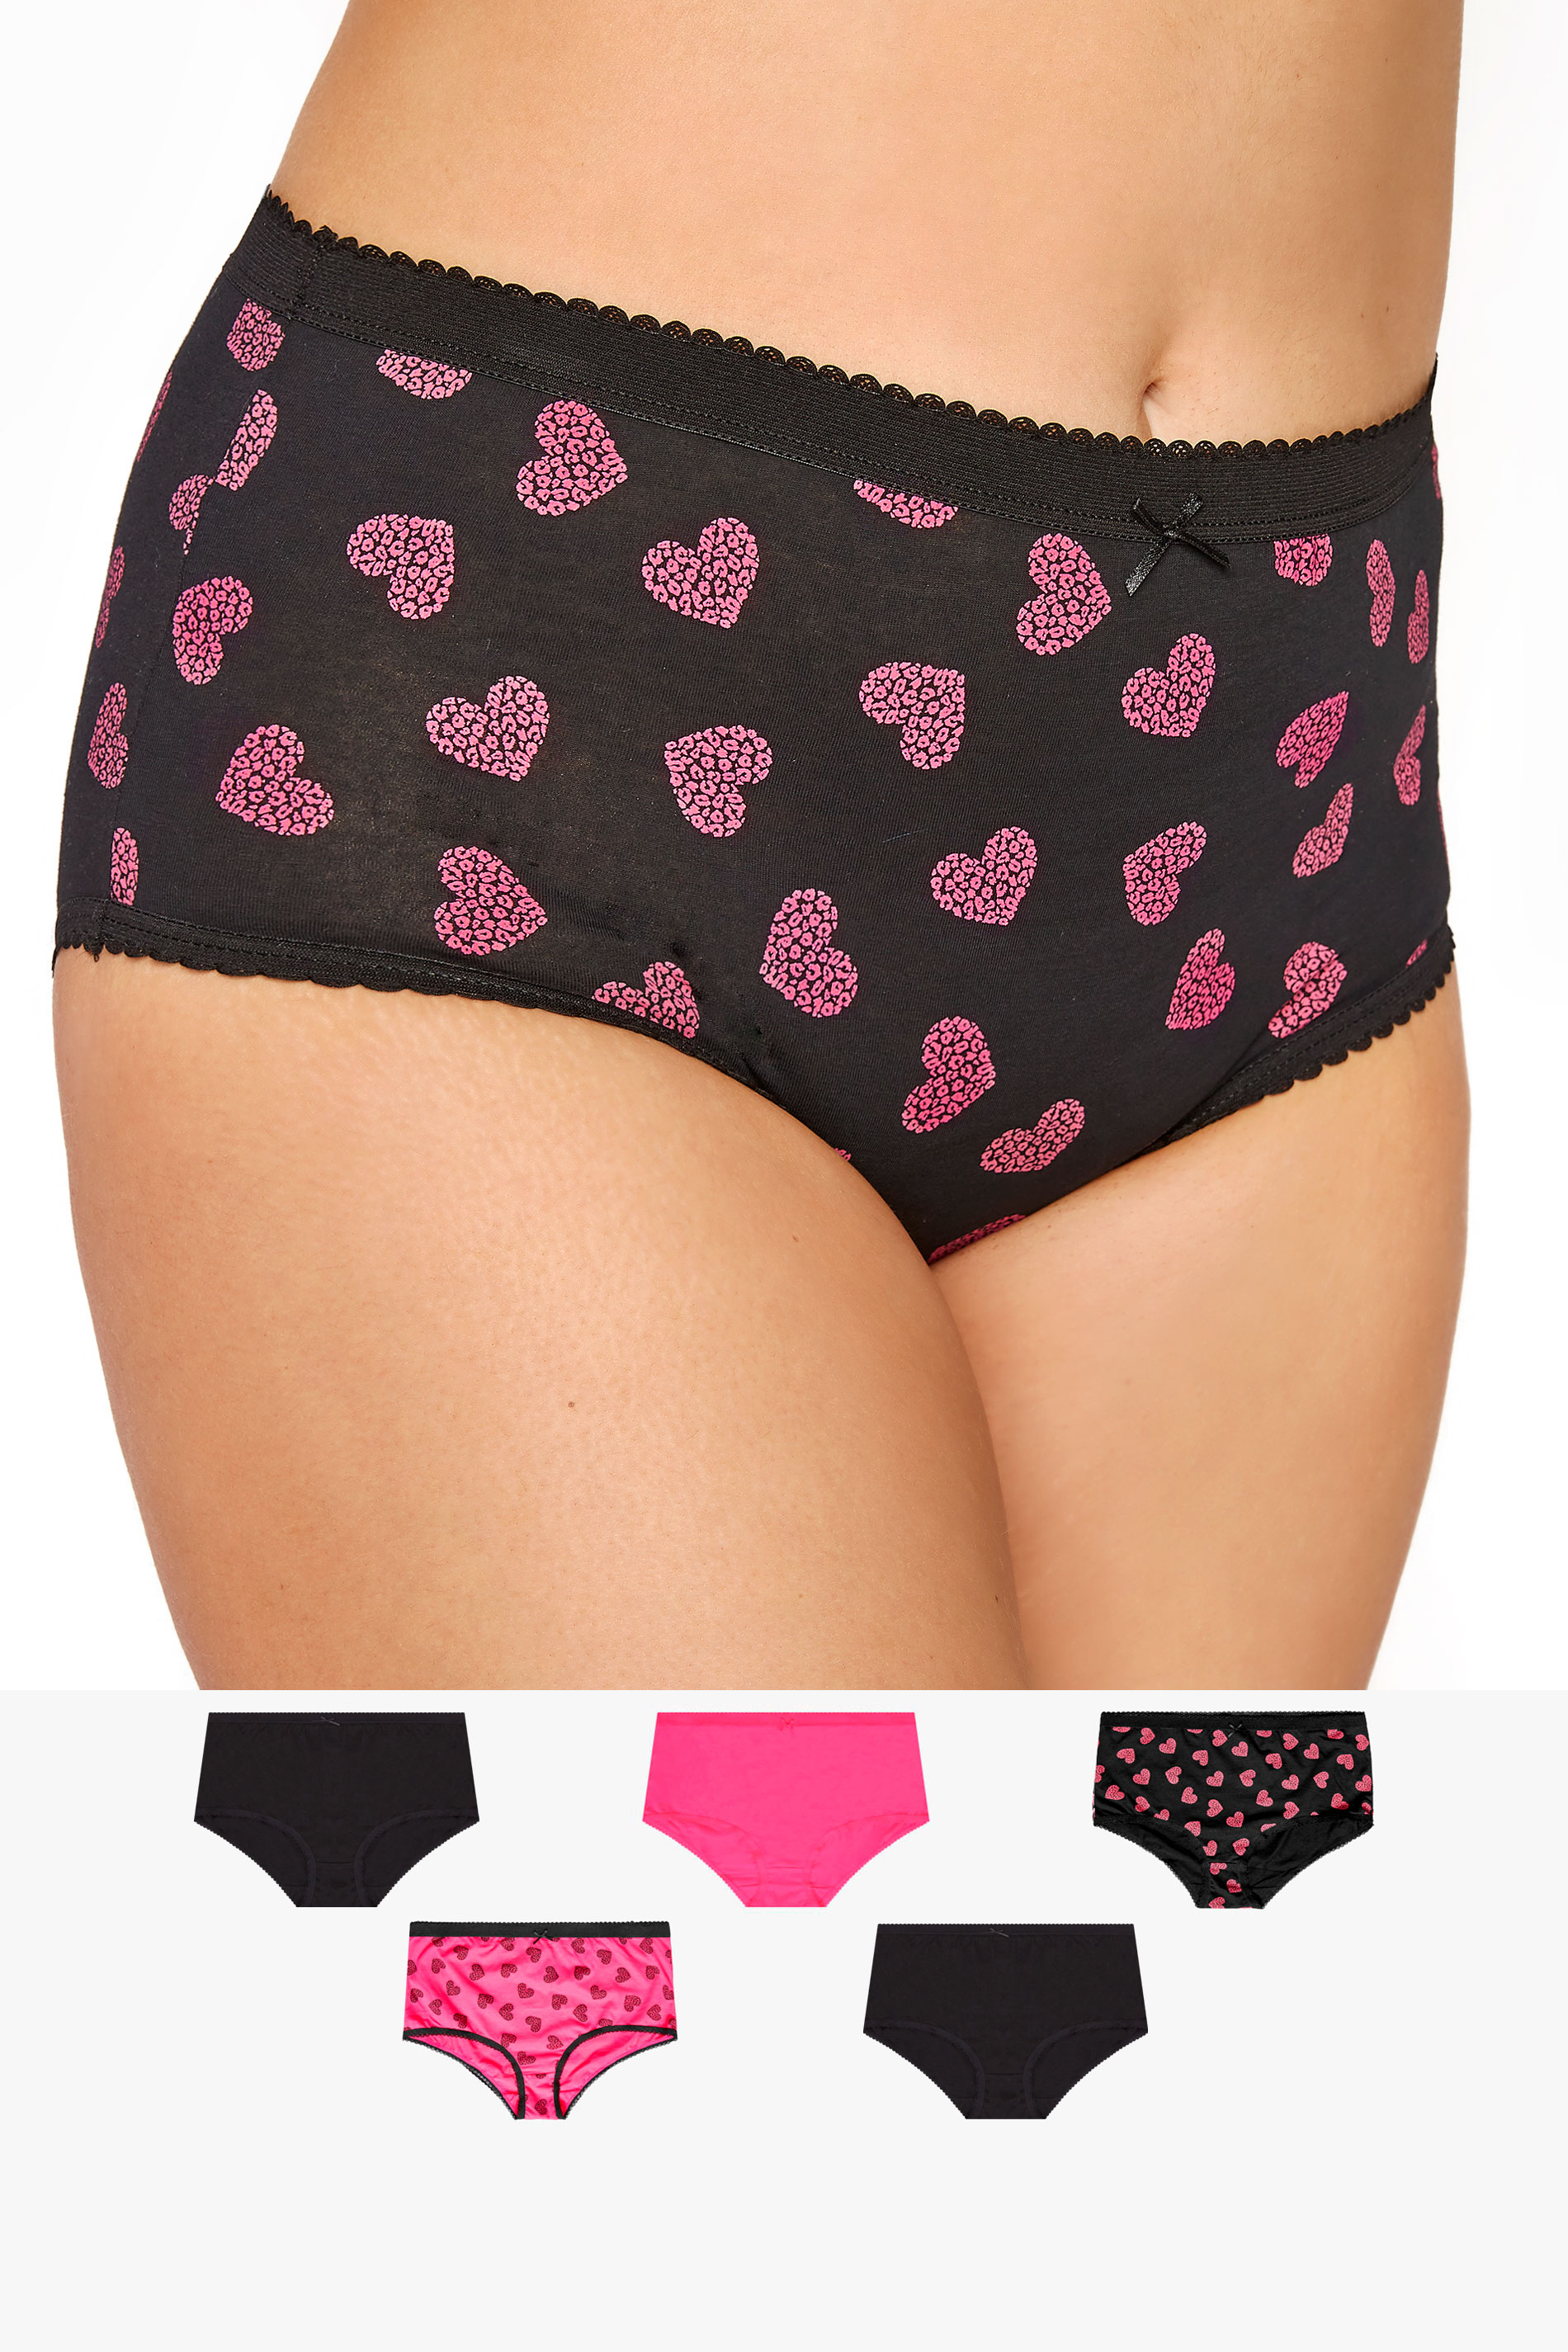 5 PACK Curve Black & Pink Animal Heart Print High Waisted Full Briefs 1